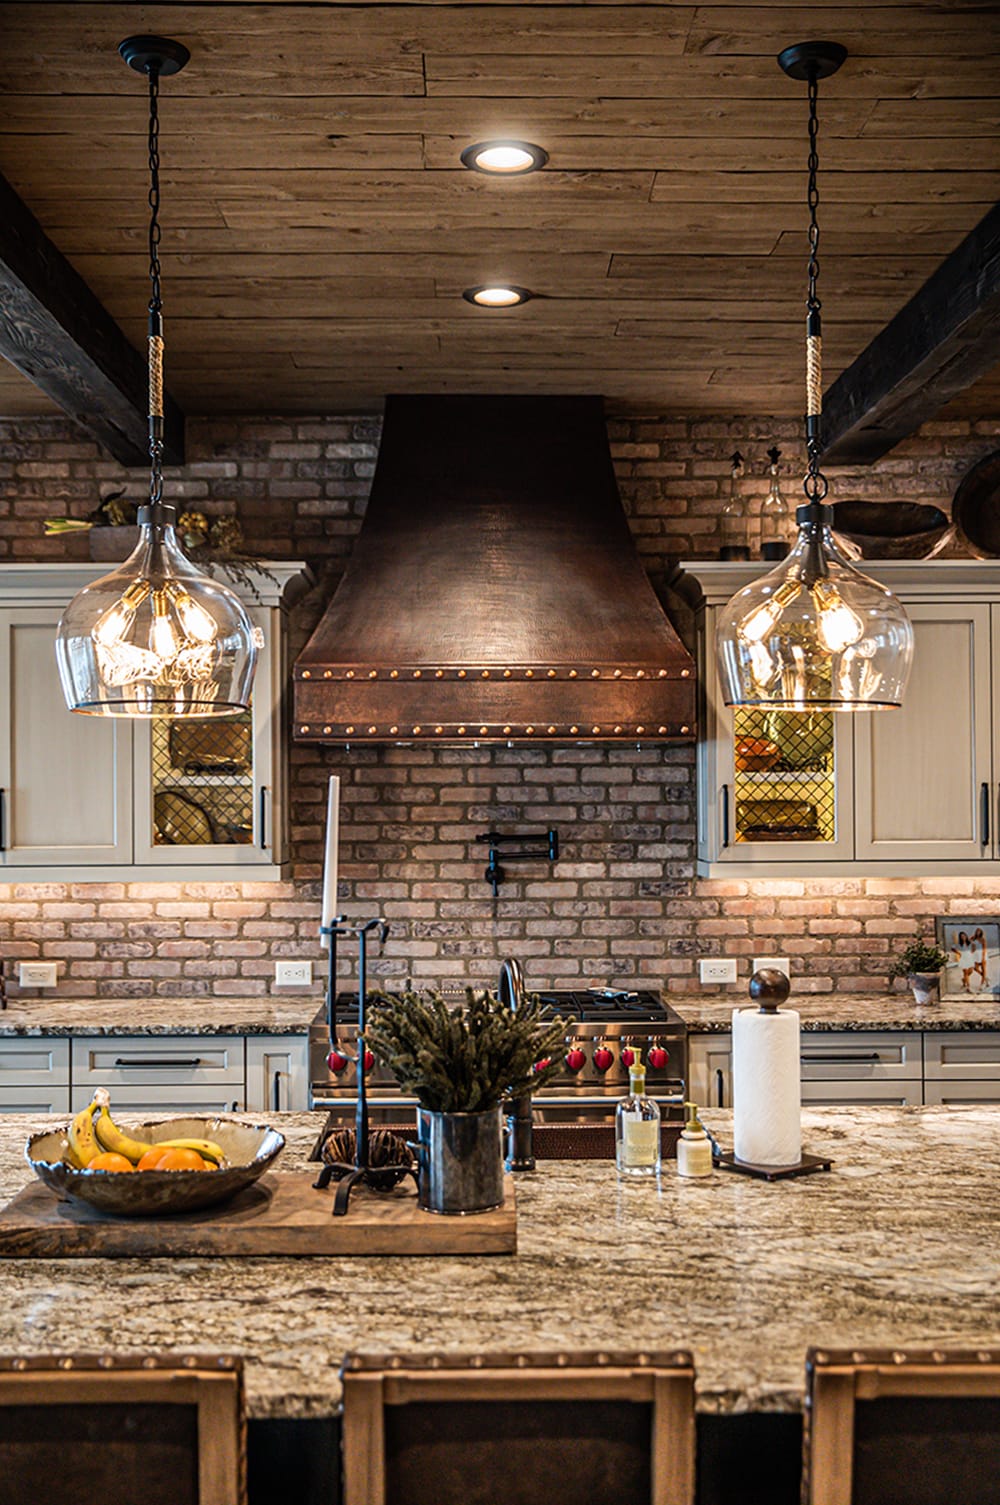 Upgrade your kitchen with CopperSmith's 36 range hood